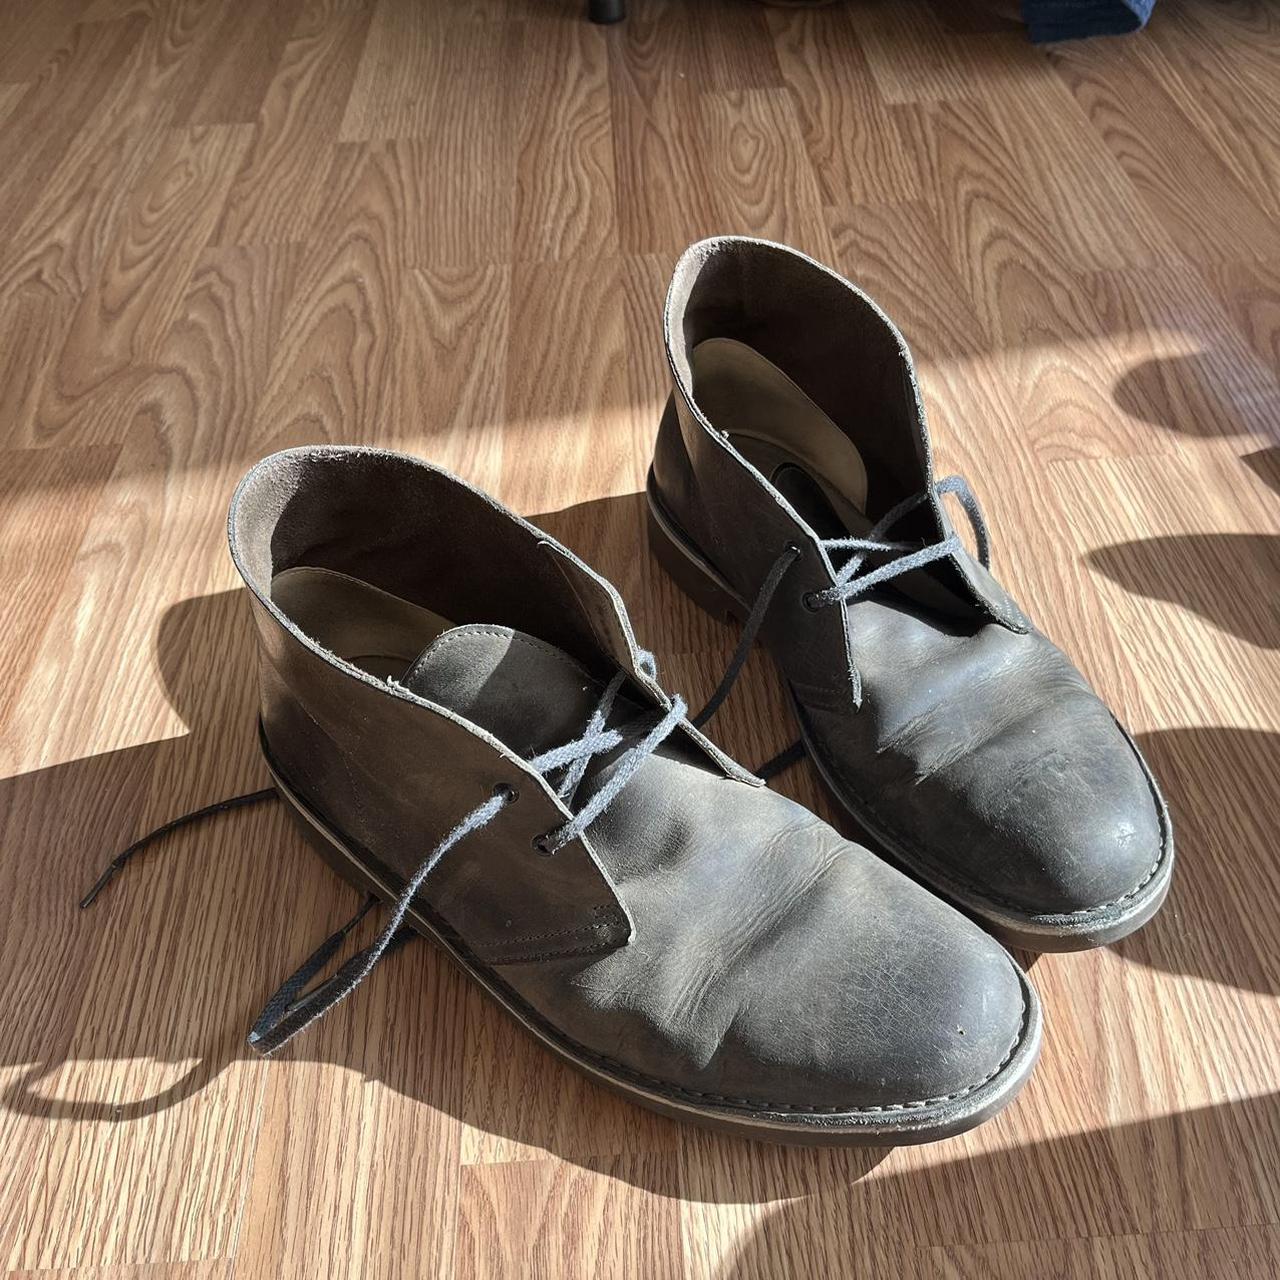 Clarks Gray Desert Boots 11.5 US. These boots have... - Depop